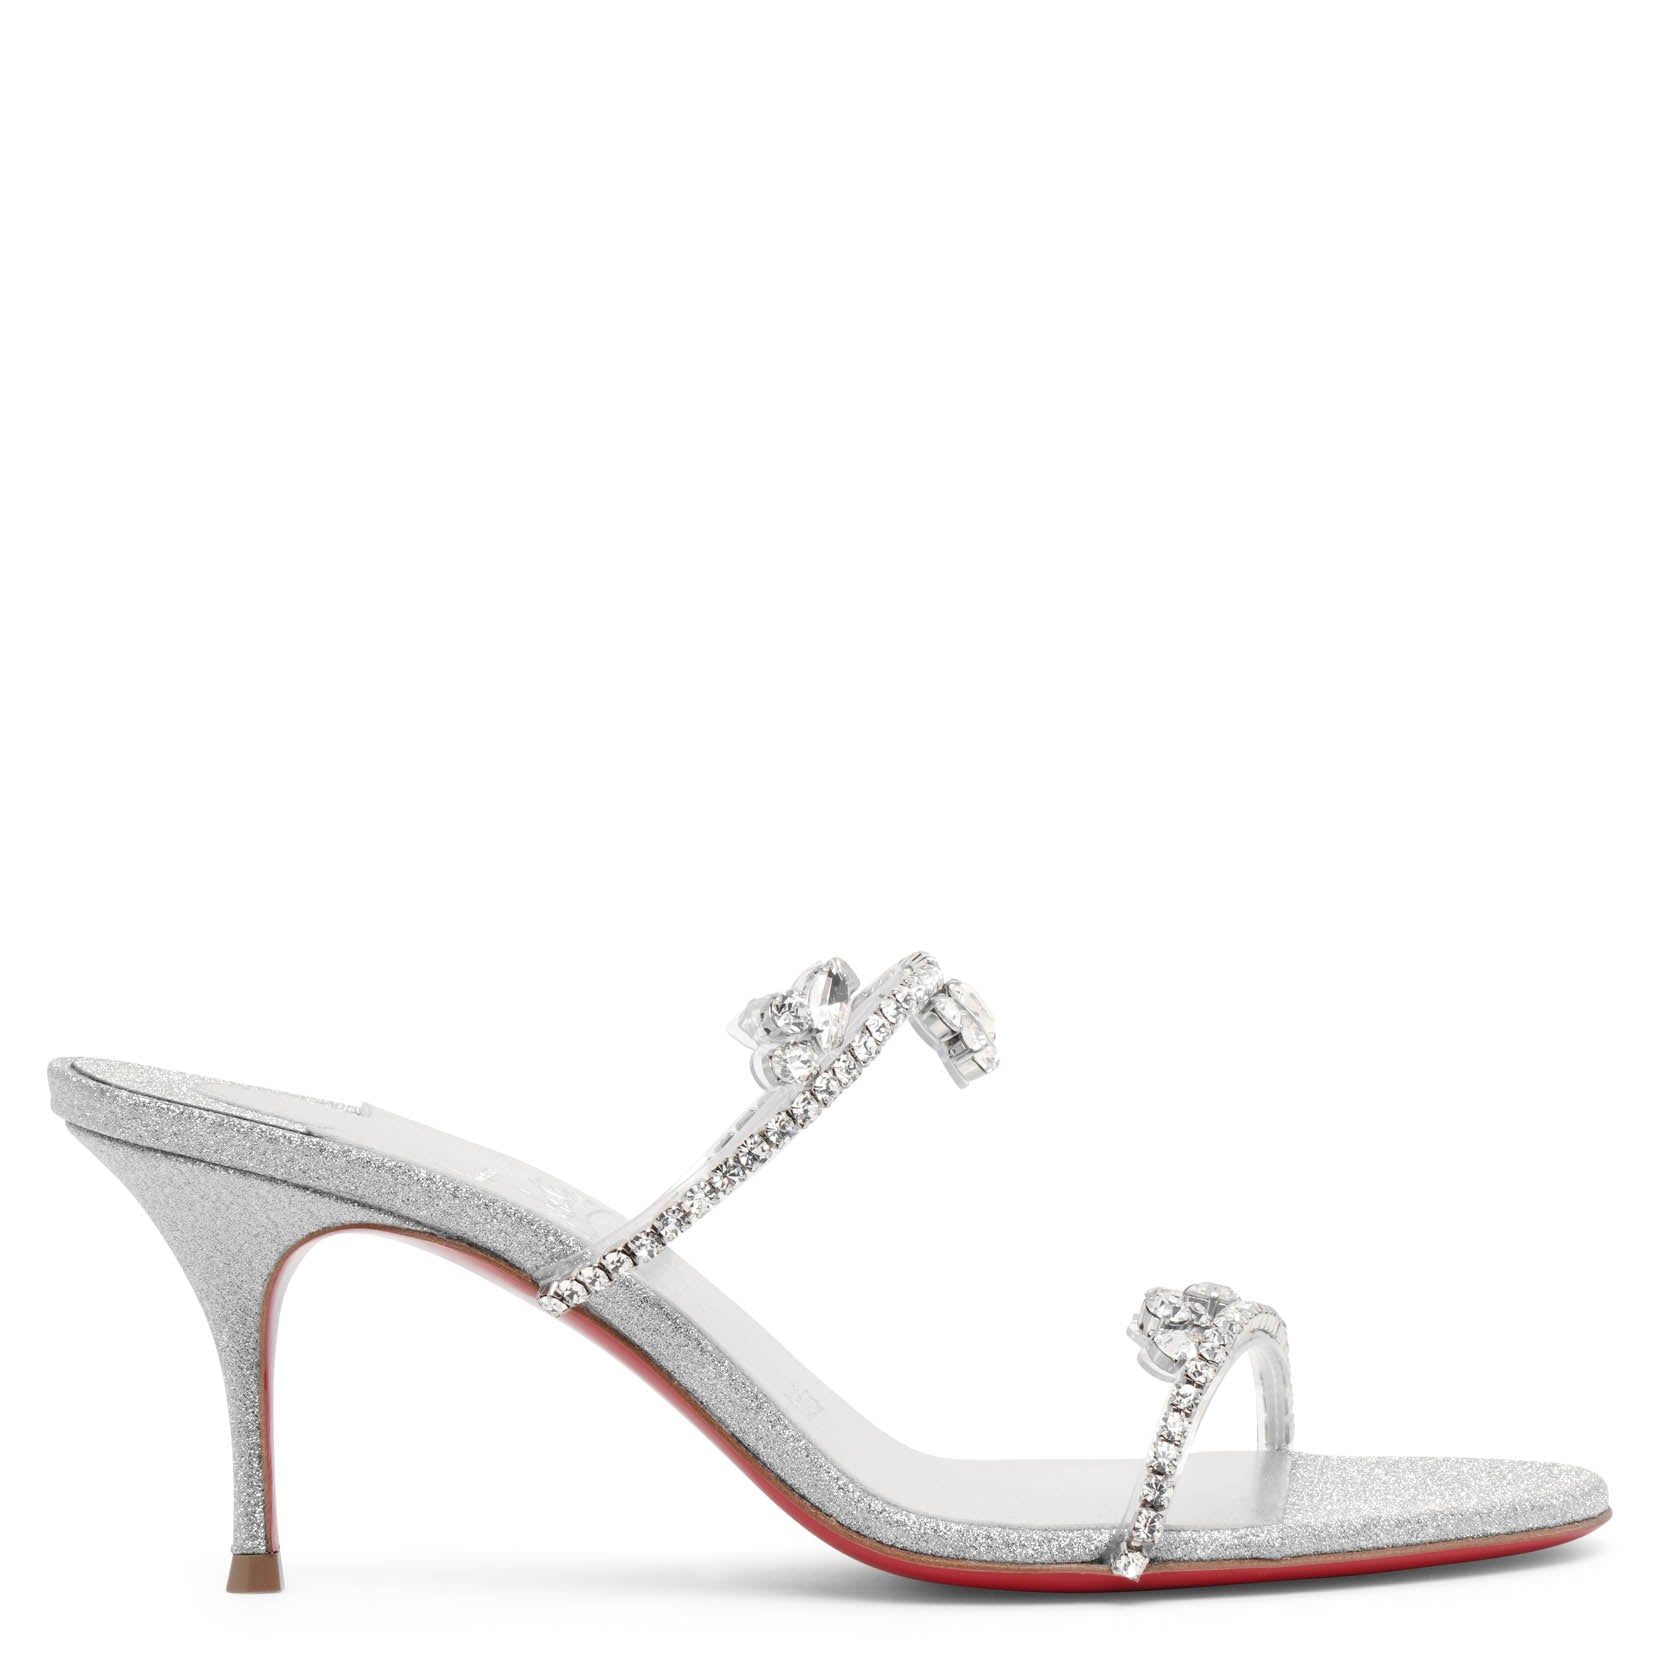 Christian Louboutin Just Queen 70 Leather And Pvc Heeled Sandals In Silver/cry/lin